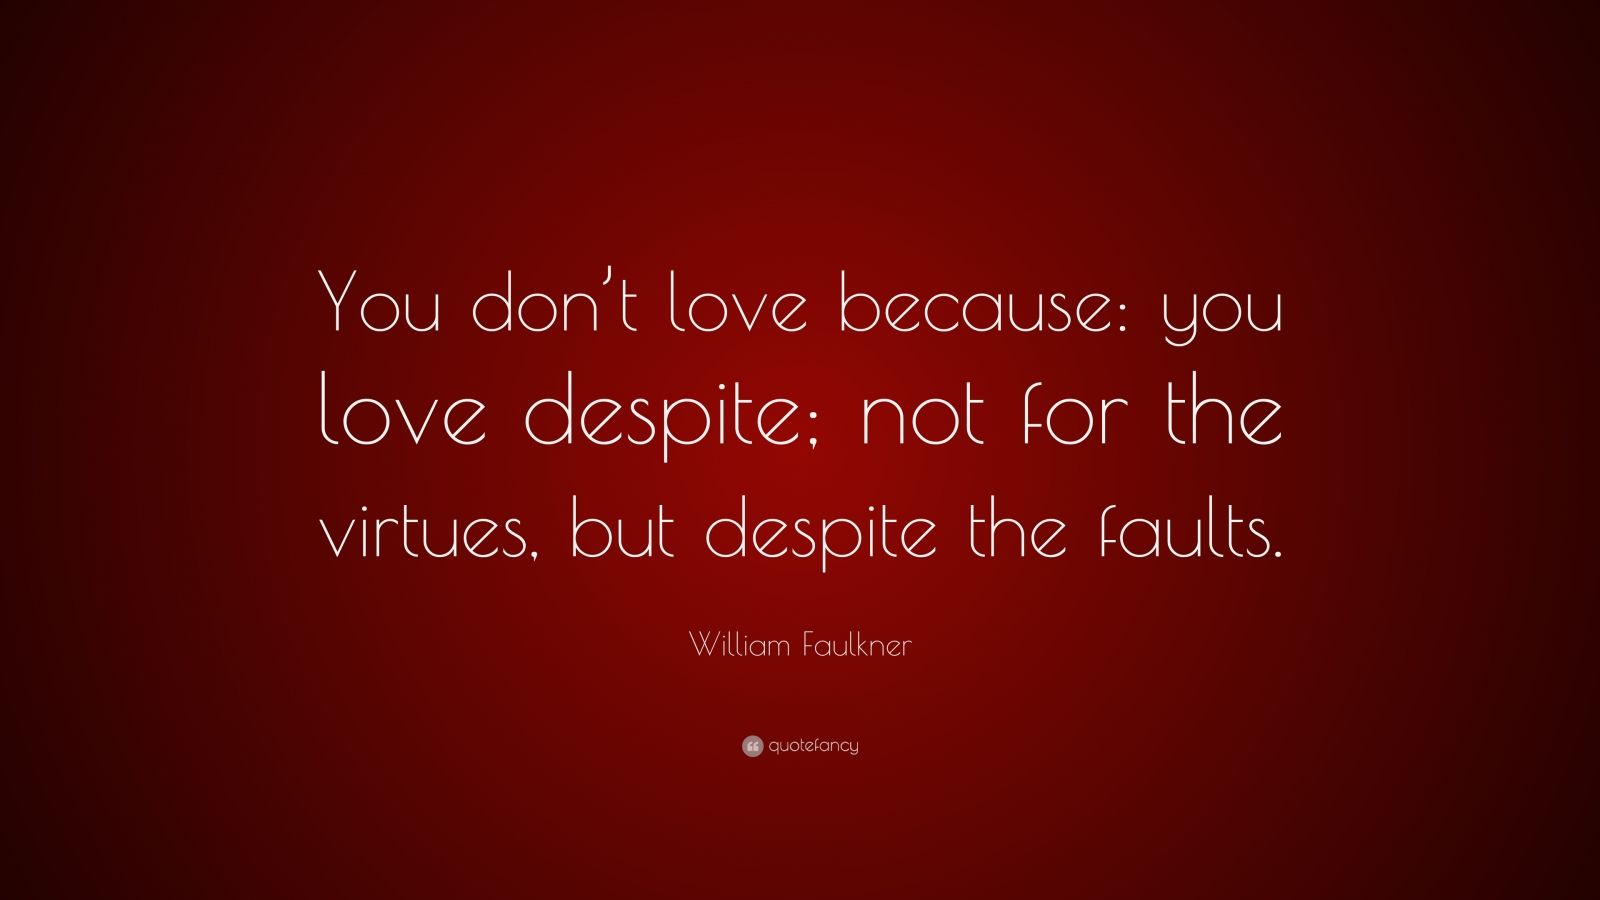 William Faulkner Quote: “You don’t love because: you love despite; not ...